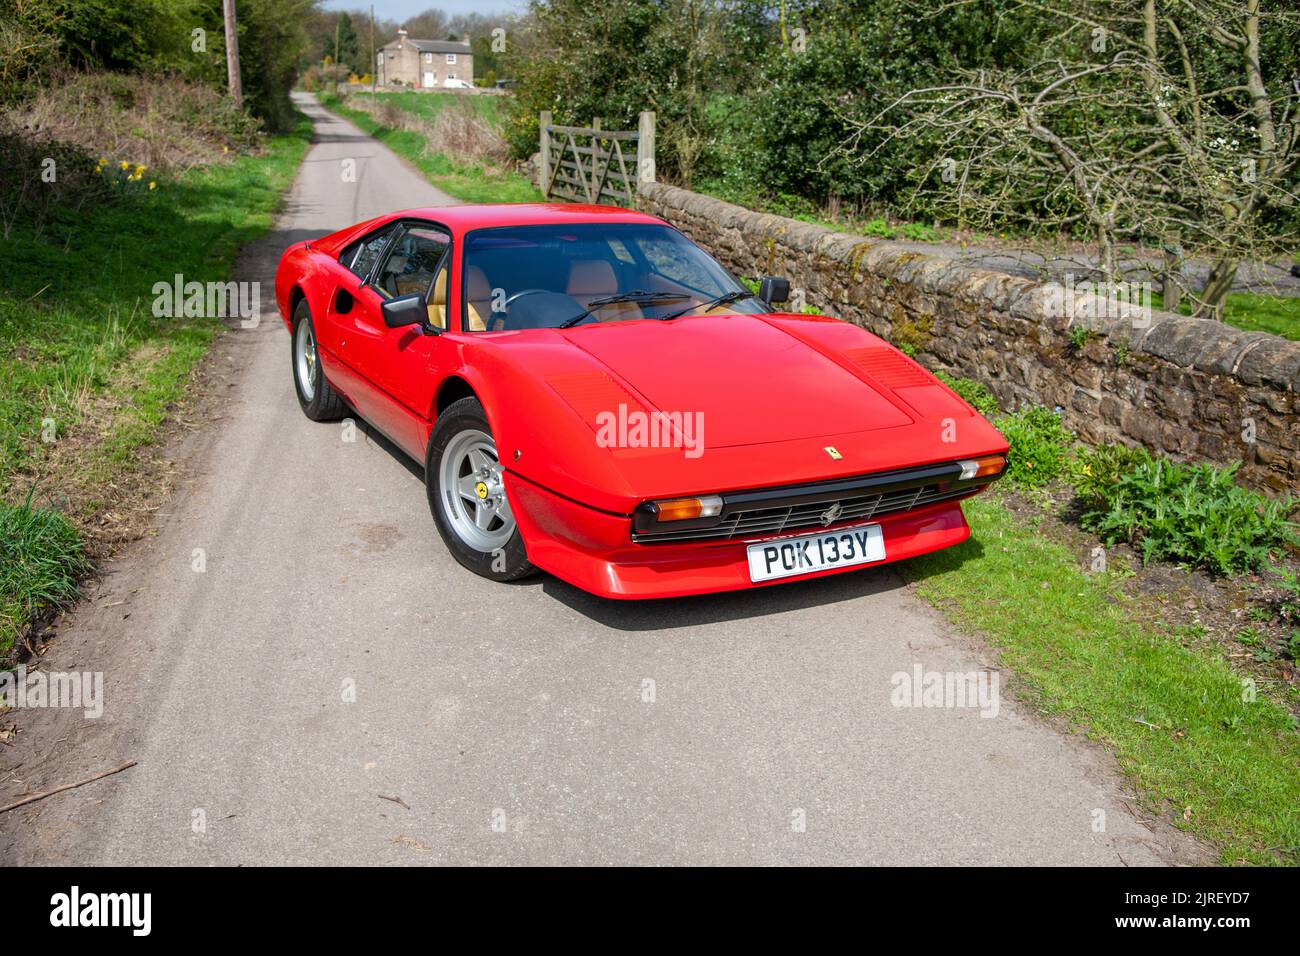 Ferrari 308 parked on a country lane on a sunny day Stock Photo